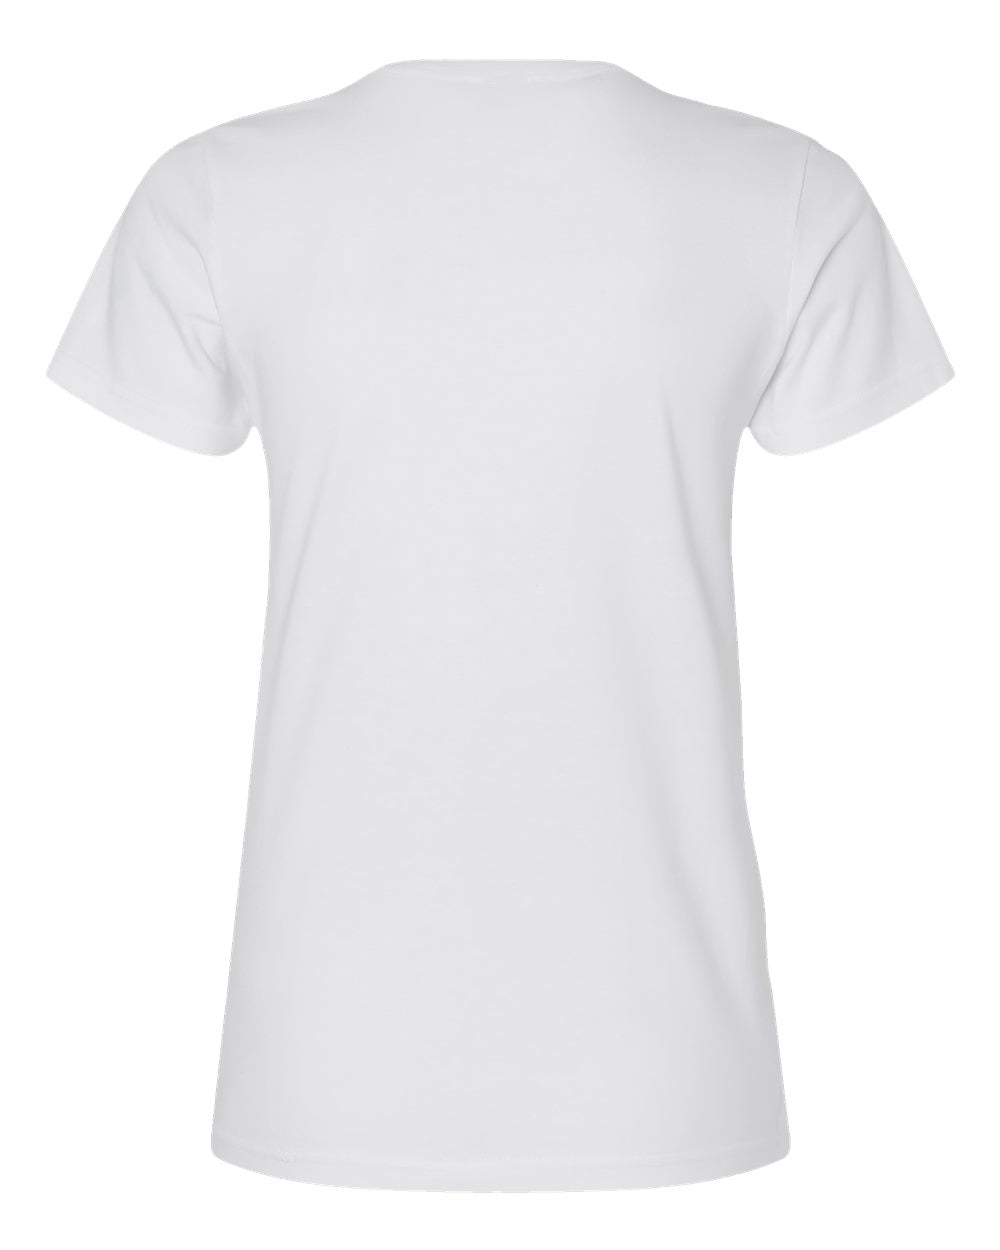 Gildan Softstyle® Women's Midweight T-Shirt 65000L #color_White